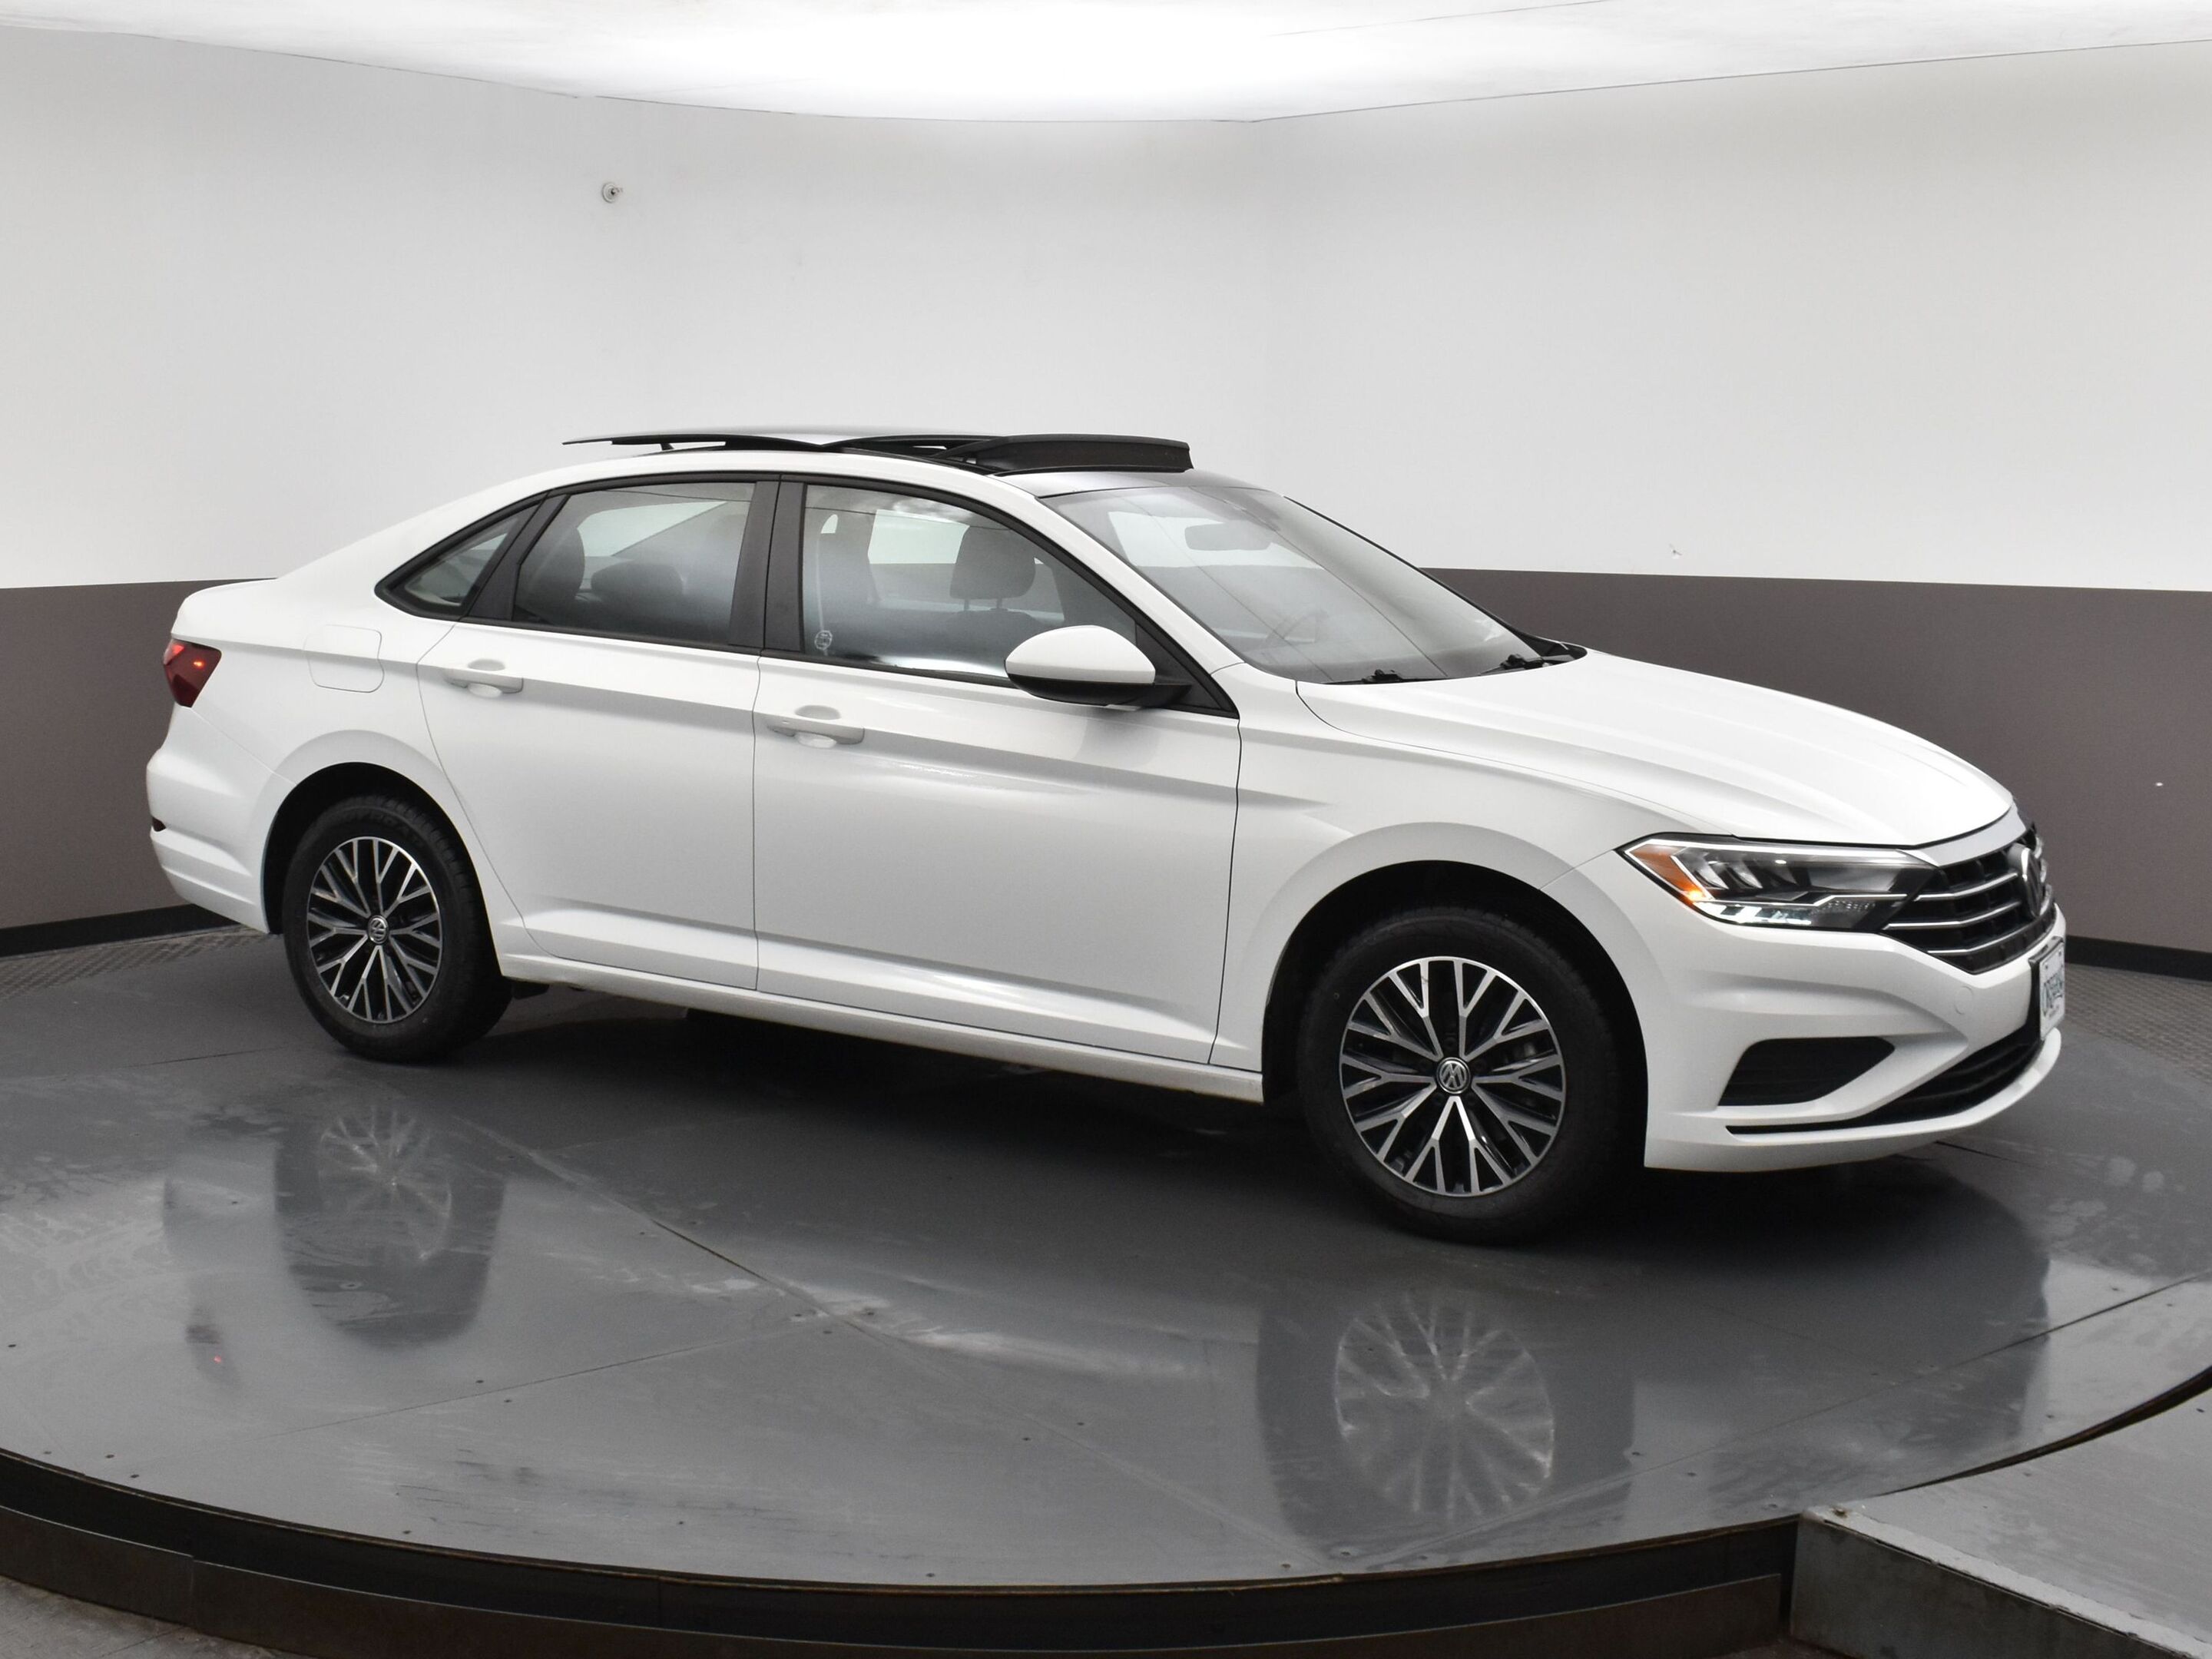 2021 Volkswagen Jetta HIGHLINE Lease Options Available!!!